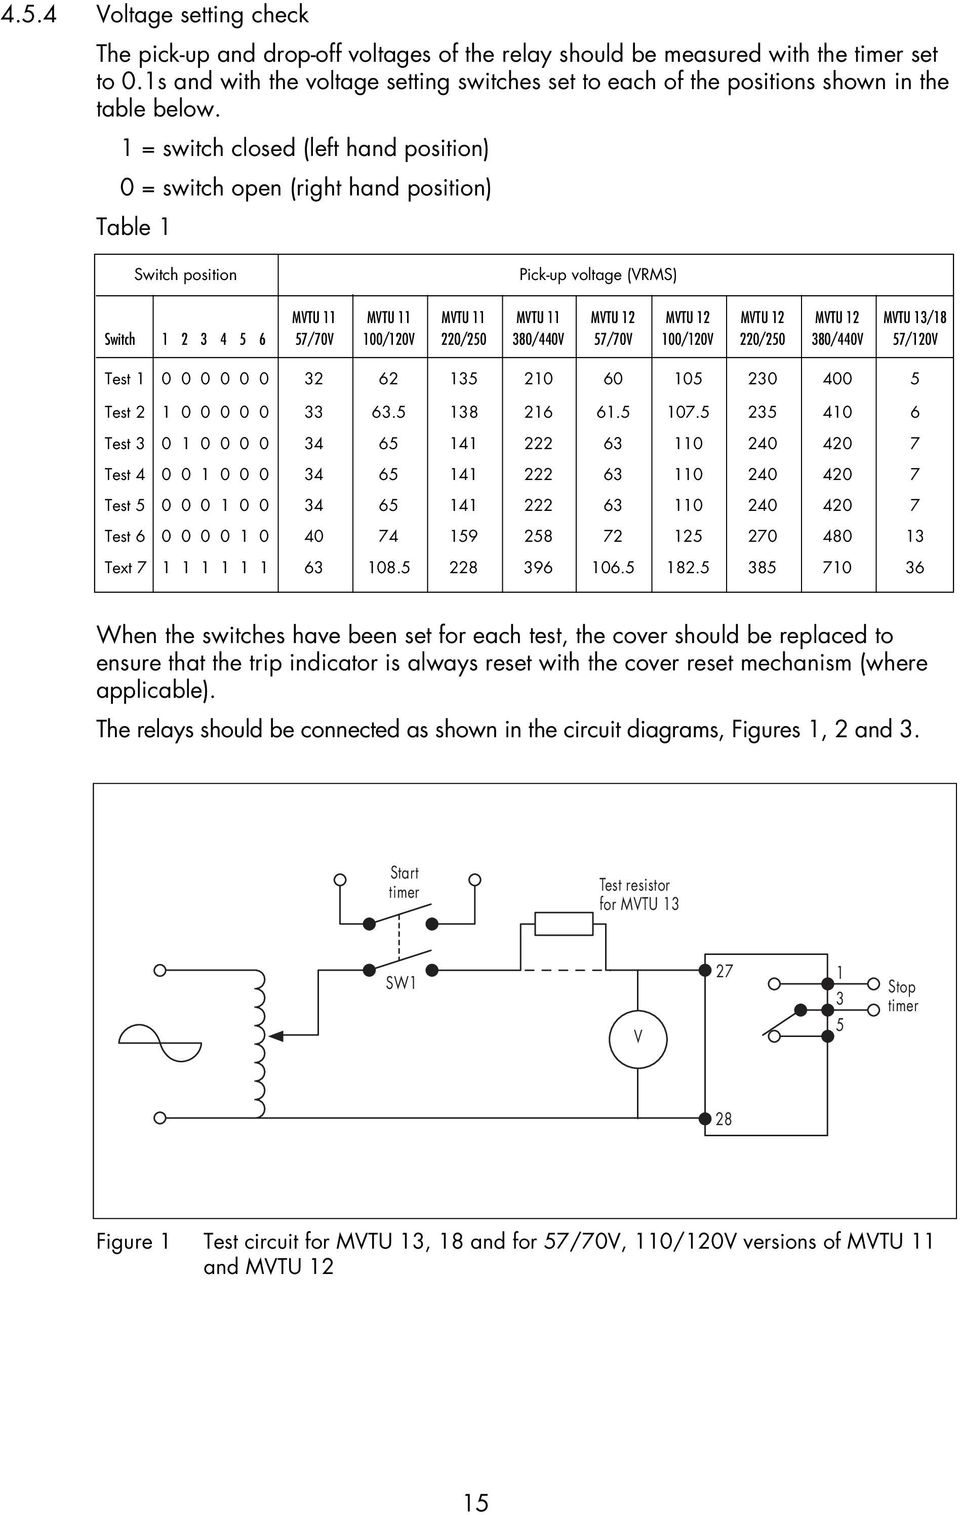 1 = switch closed (left hand position) 0 = switch open (right hand position) Table 1 Switch position Pick-up voltage (VRMS) MVTU 11 MVTU 11 MVTU 11 MVTU 11 MVTU 12 MVTU 12 MVTU 12 MVTU 12 MVTU 13/18